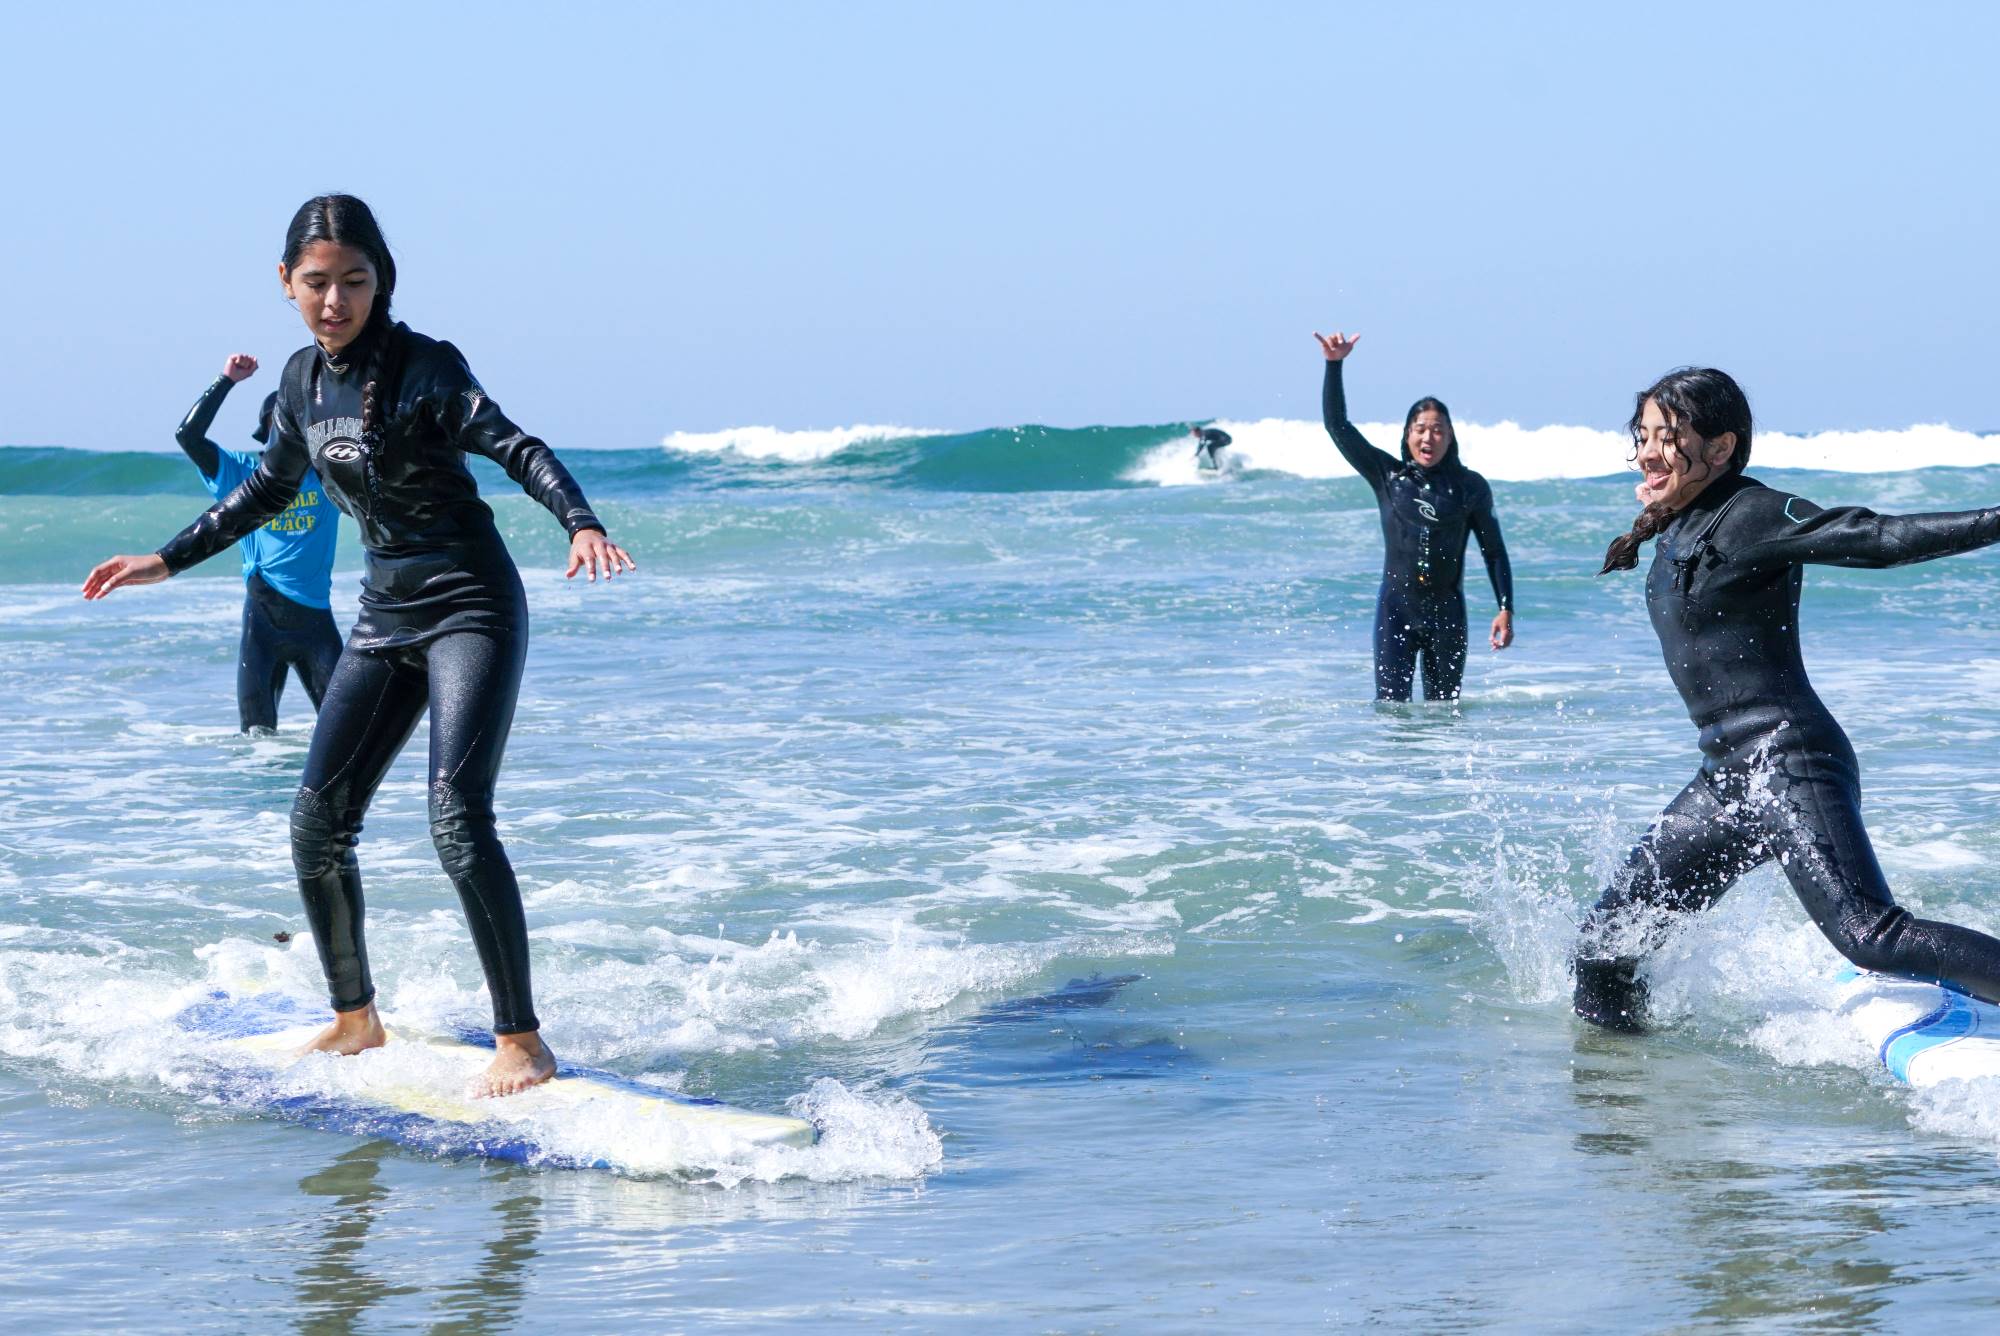 Two children succeed in standing on their boards in the surf while adults in the background cheer